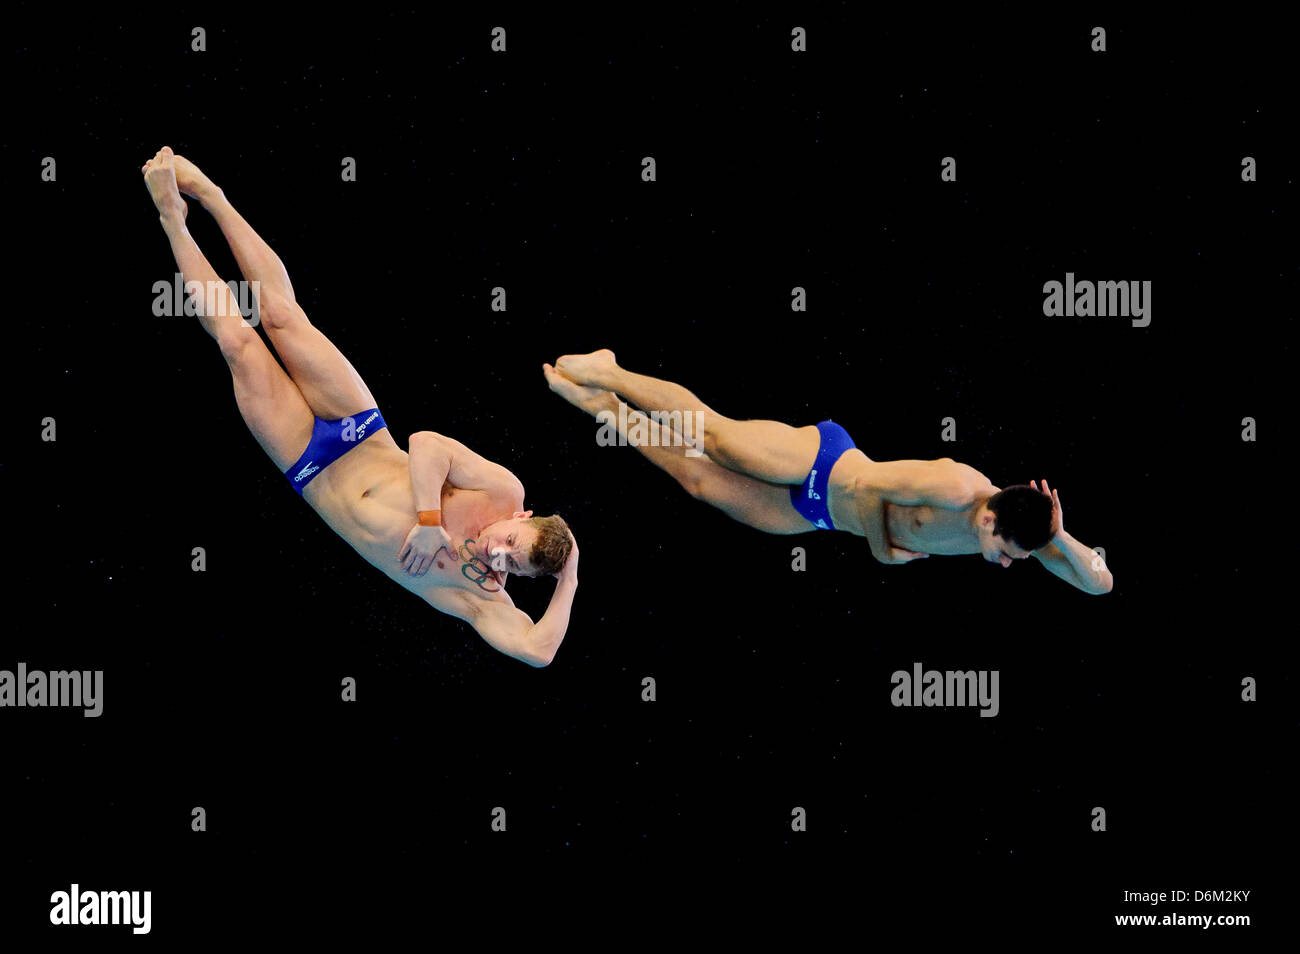 Edinburgh, Scotland. 19th April, 2013. Eventual Bronze medallists Christopher Mears &amp; Nicholas Robinson-Baker of Great Britain (GBR) in action during the Mens 3m Synchronised Springboard Final on Day 1 of the FINA/Midea Diving World Series 2013 at the Royal Commonwealth Pool in Edinburgh. Stock Photo